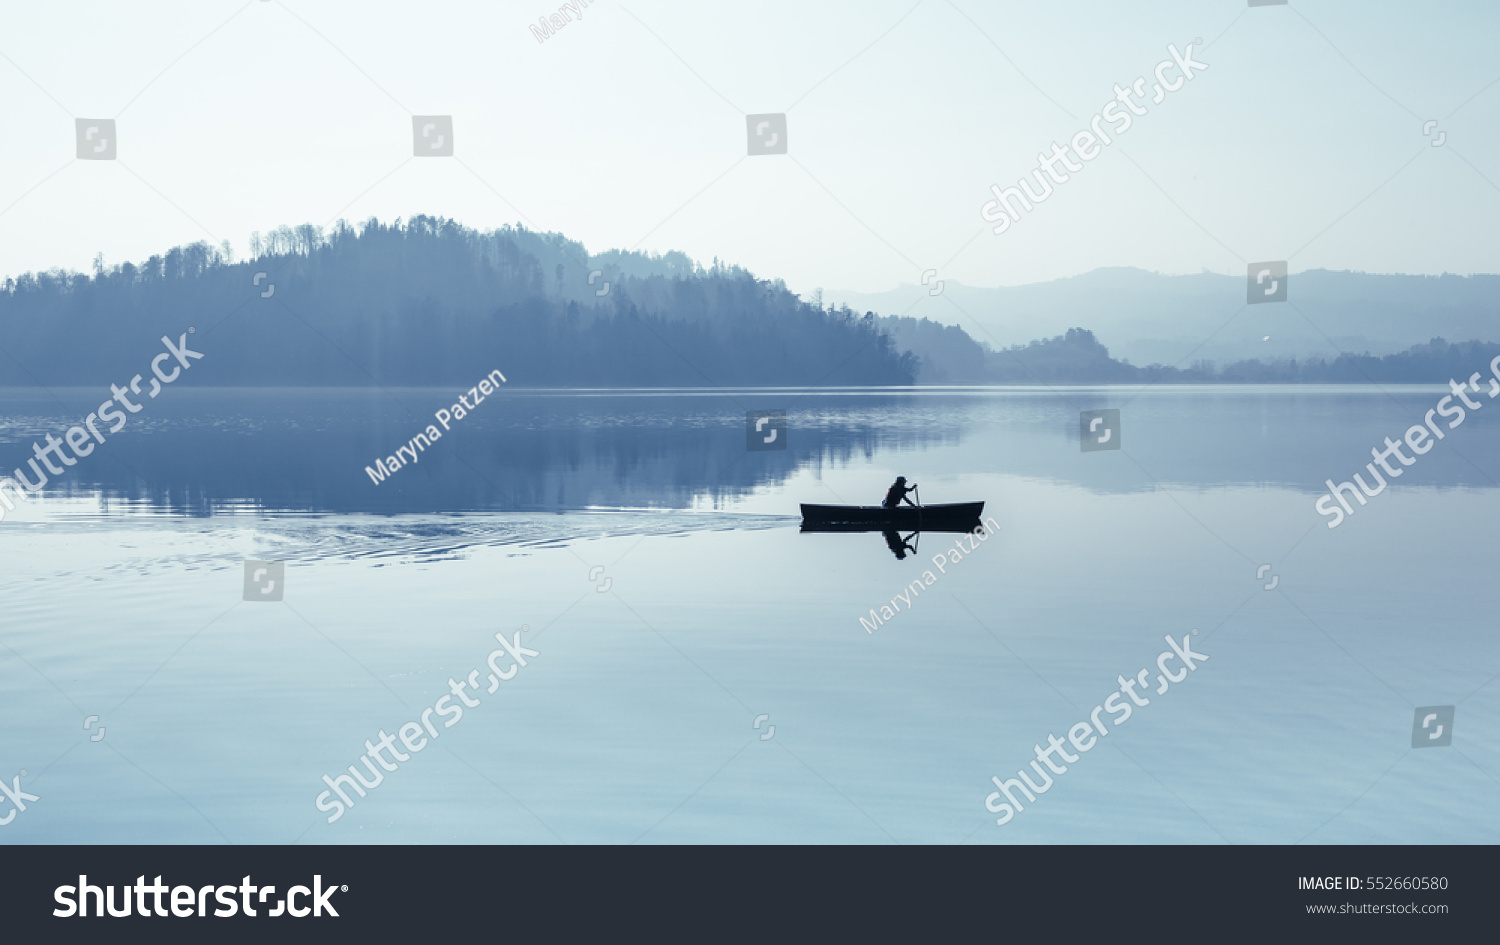 Fog over the lake. In calm water reflection mirror. Man with a paddle in the boat. Black and White. #552660580